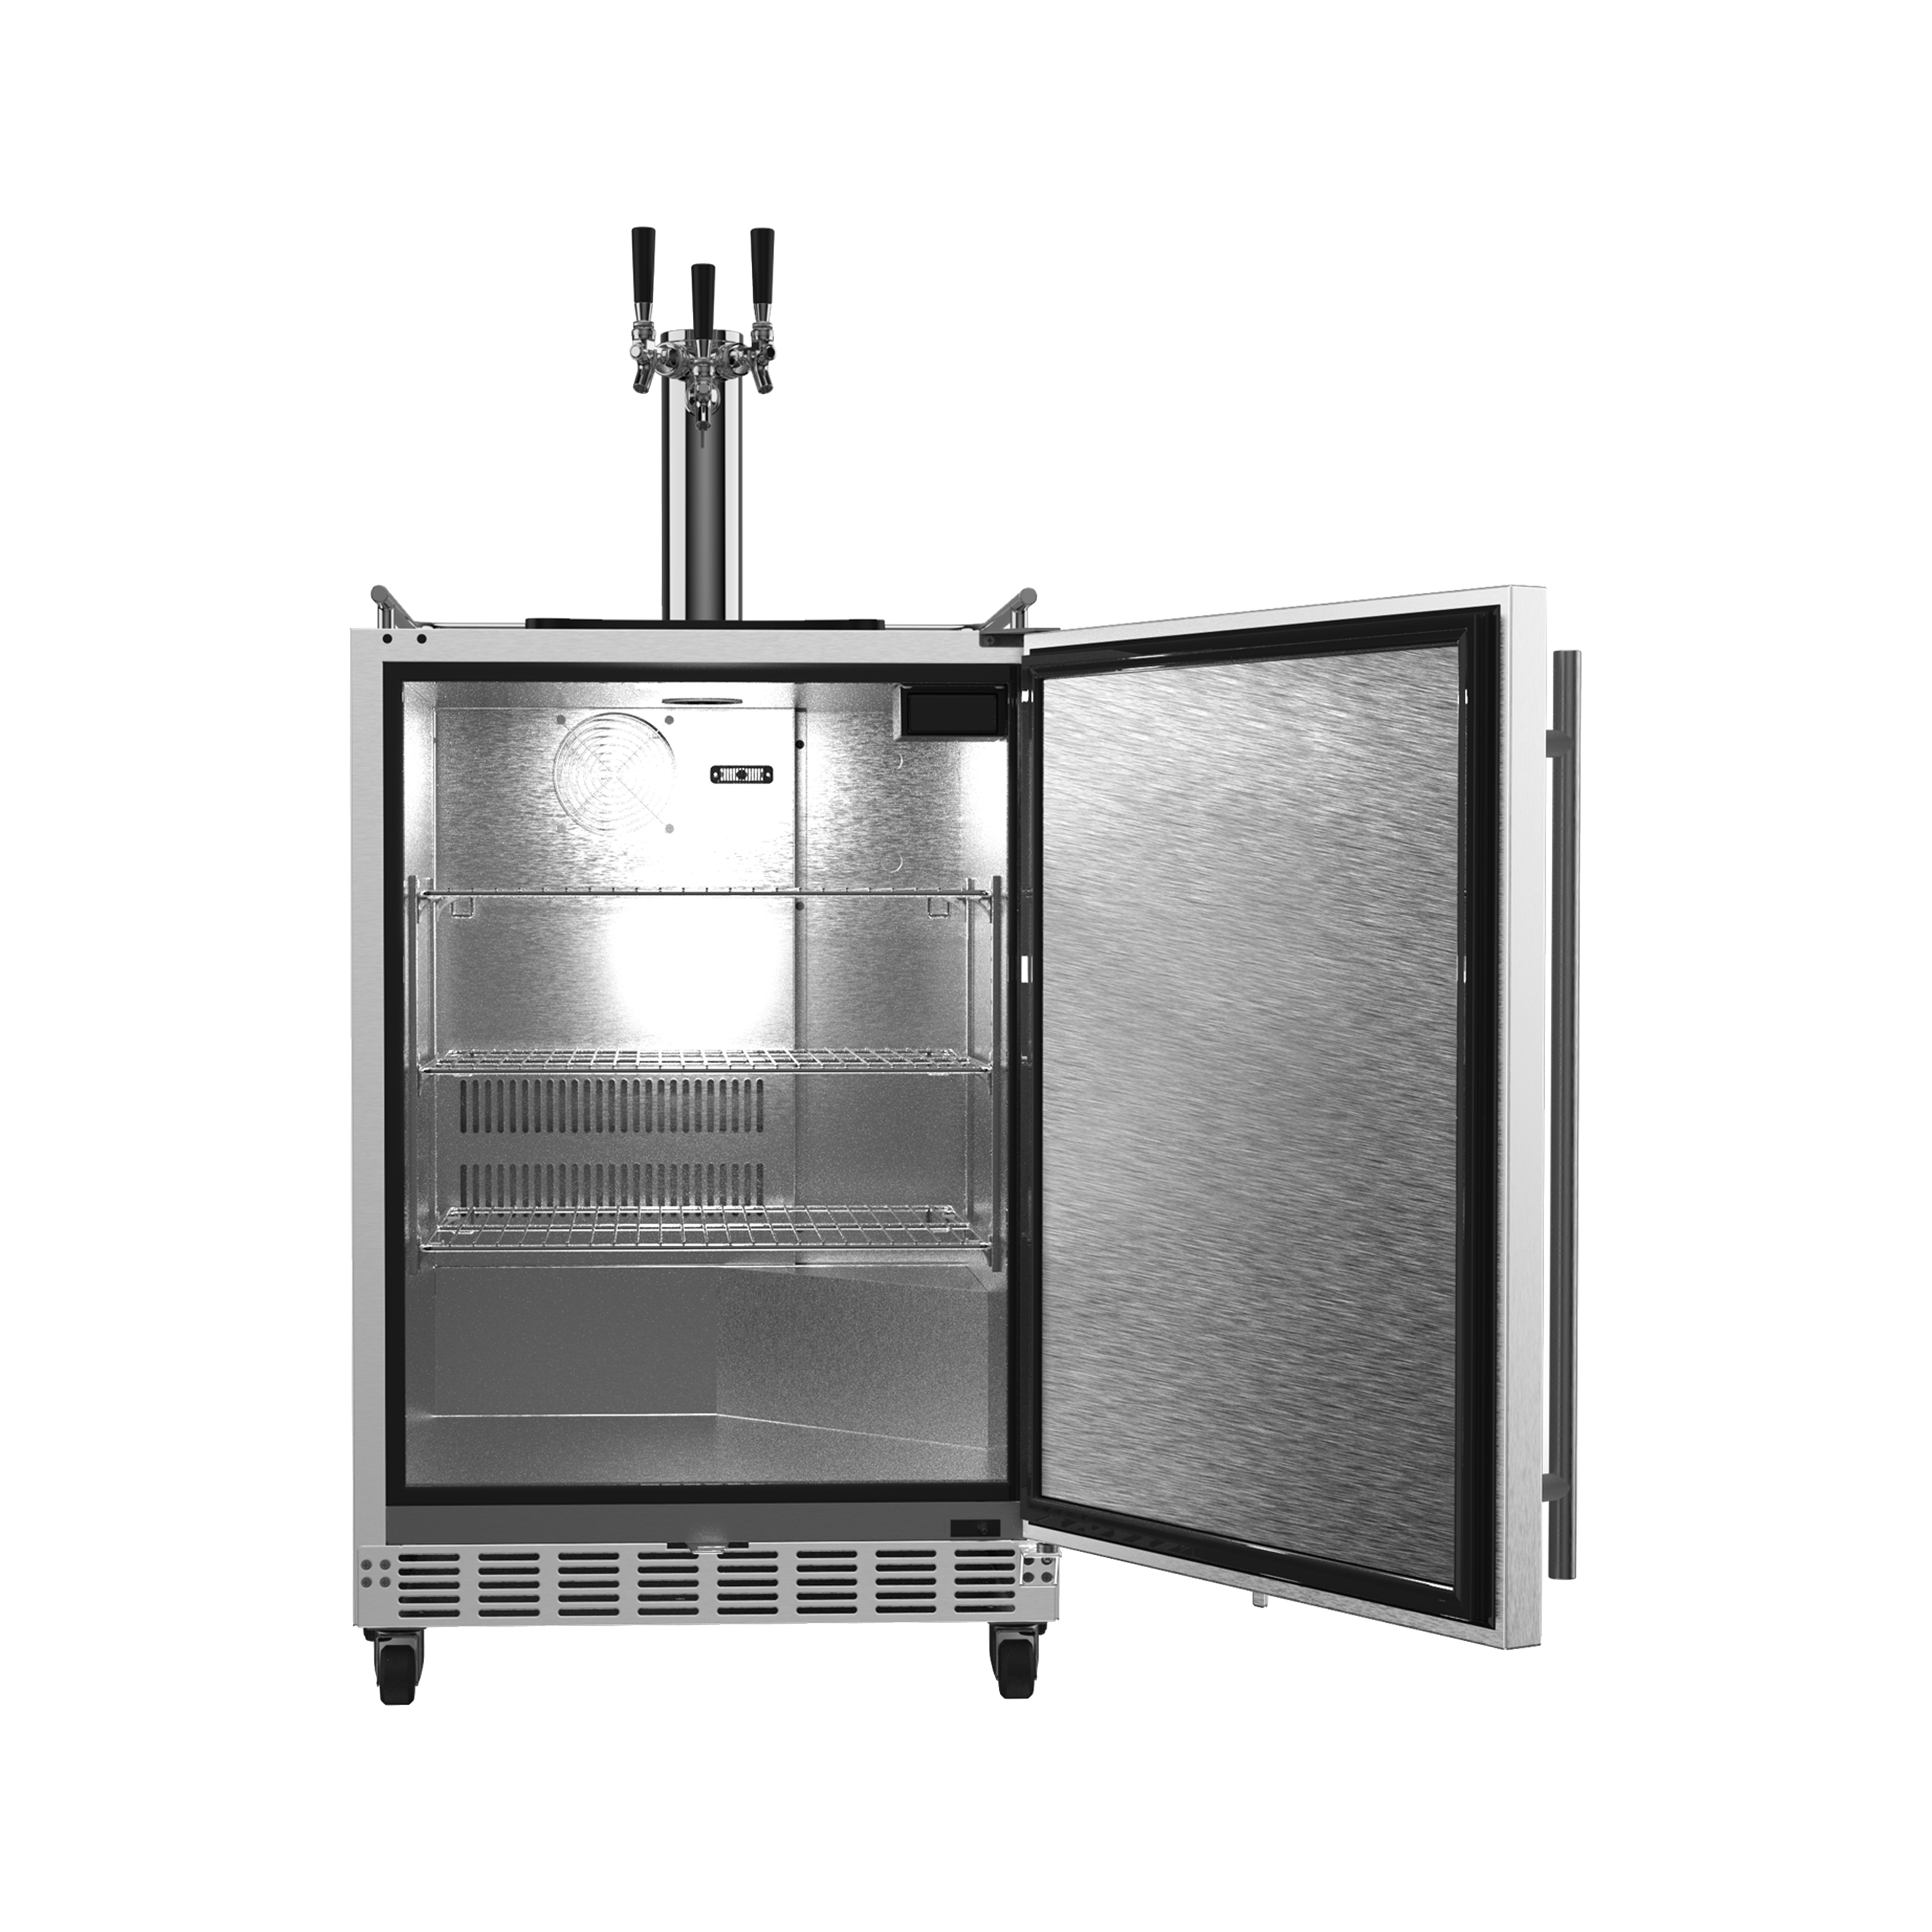 Front view of a 6.04 Cu Ft Undercounter Kegerator Outdoor Beverage Fridge with the door open, displaying interior space featuring three shelves and a digital thermostat display.